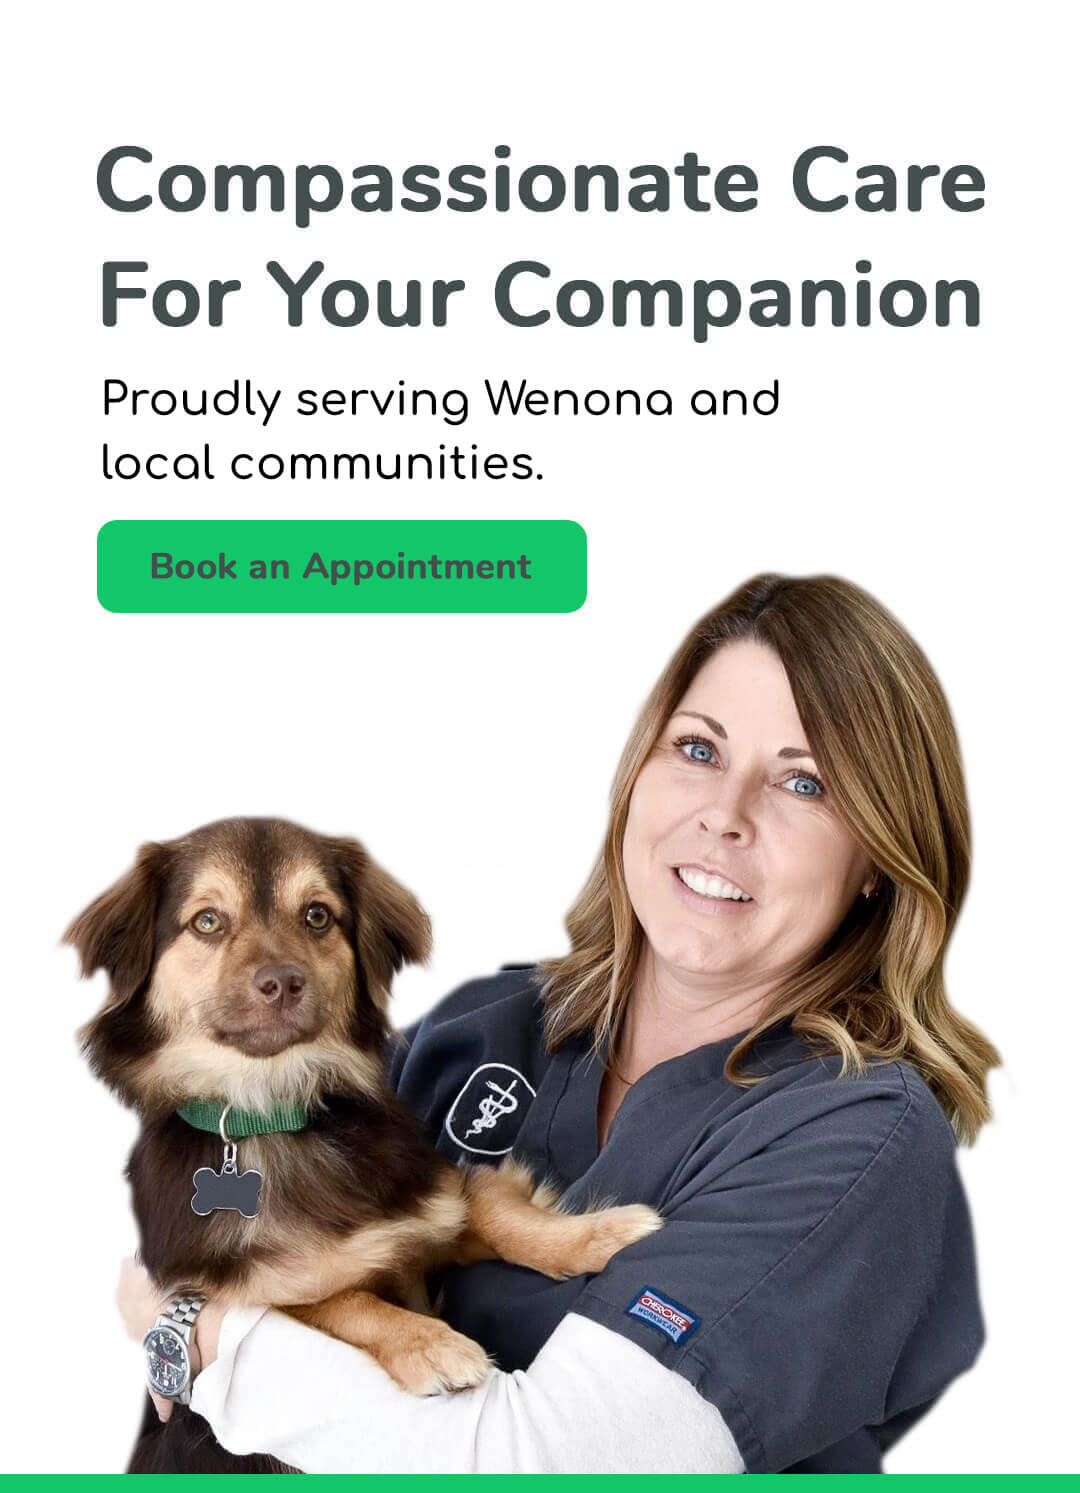 Compassionate care for your companion. Proudly serving Wenona and local communities. Book an appointment